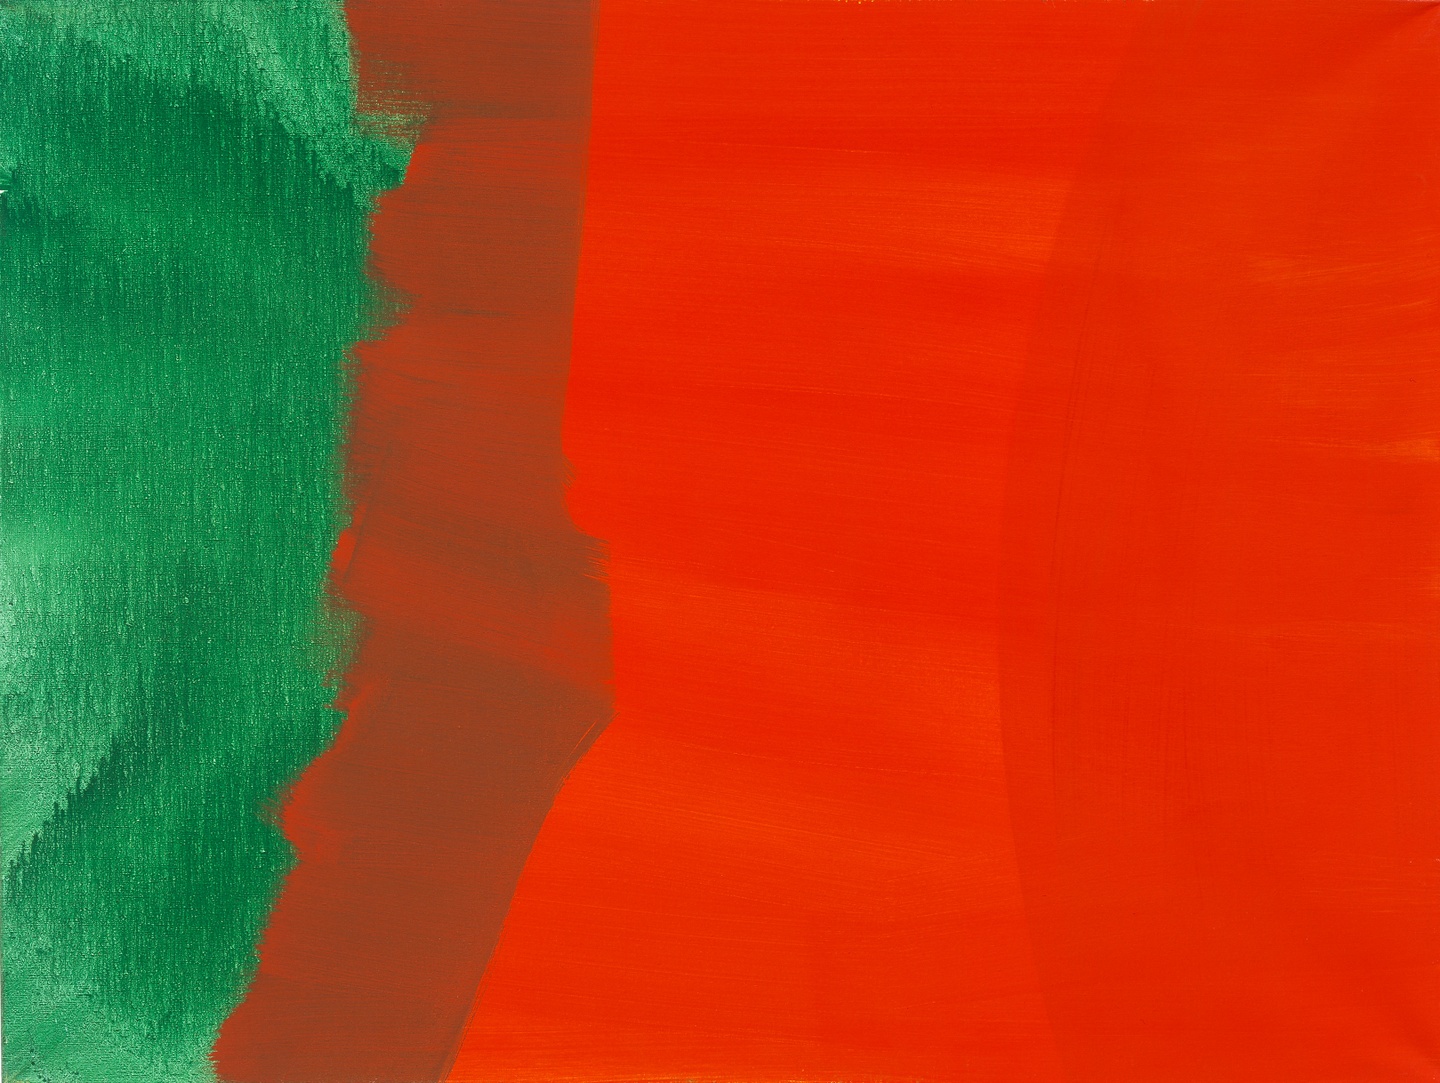 An abstract painting with a green section at the left that transitions into a vibrant red section